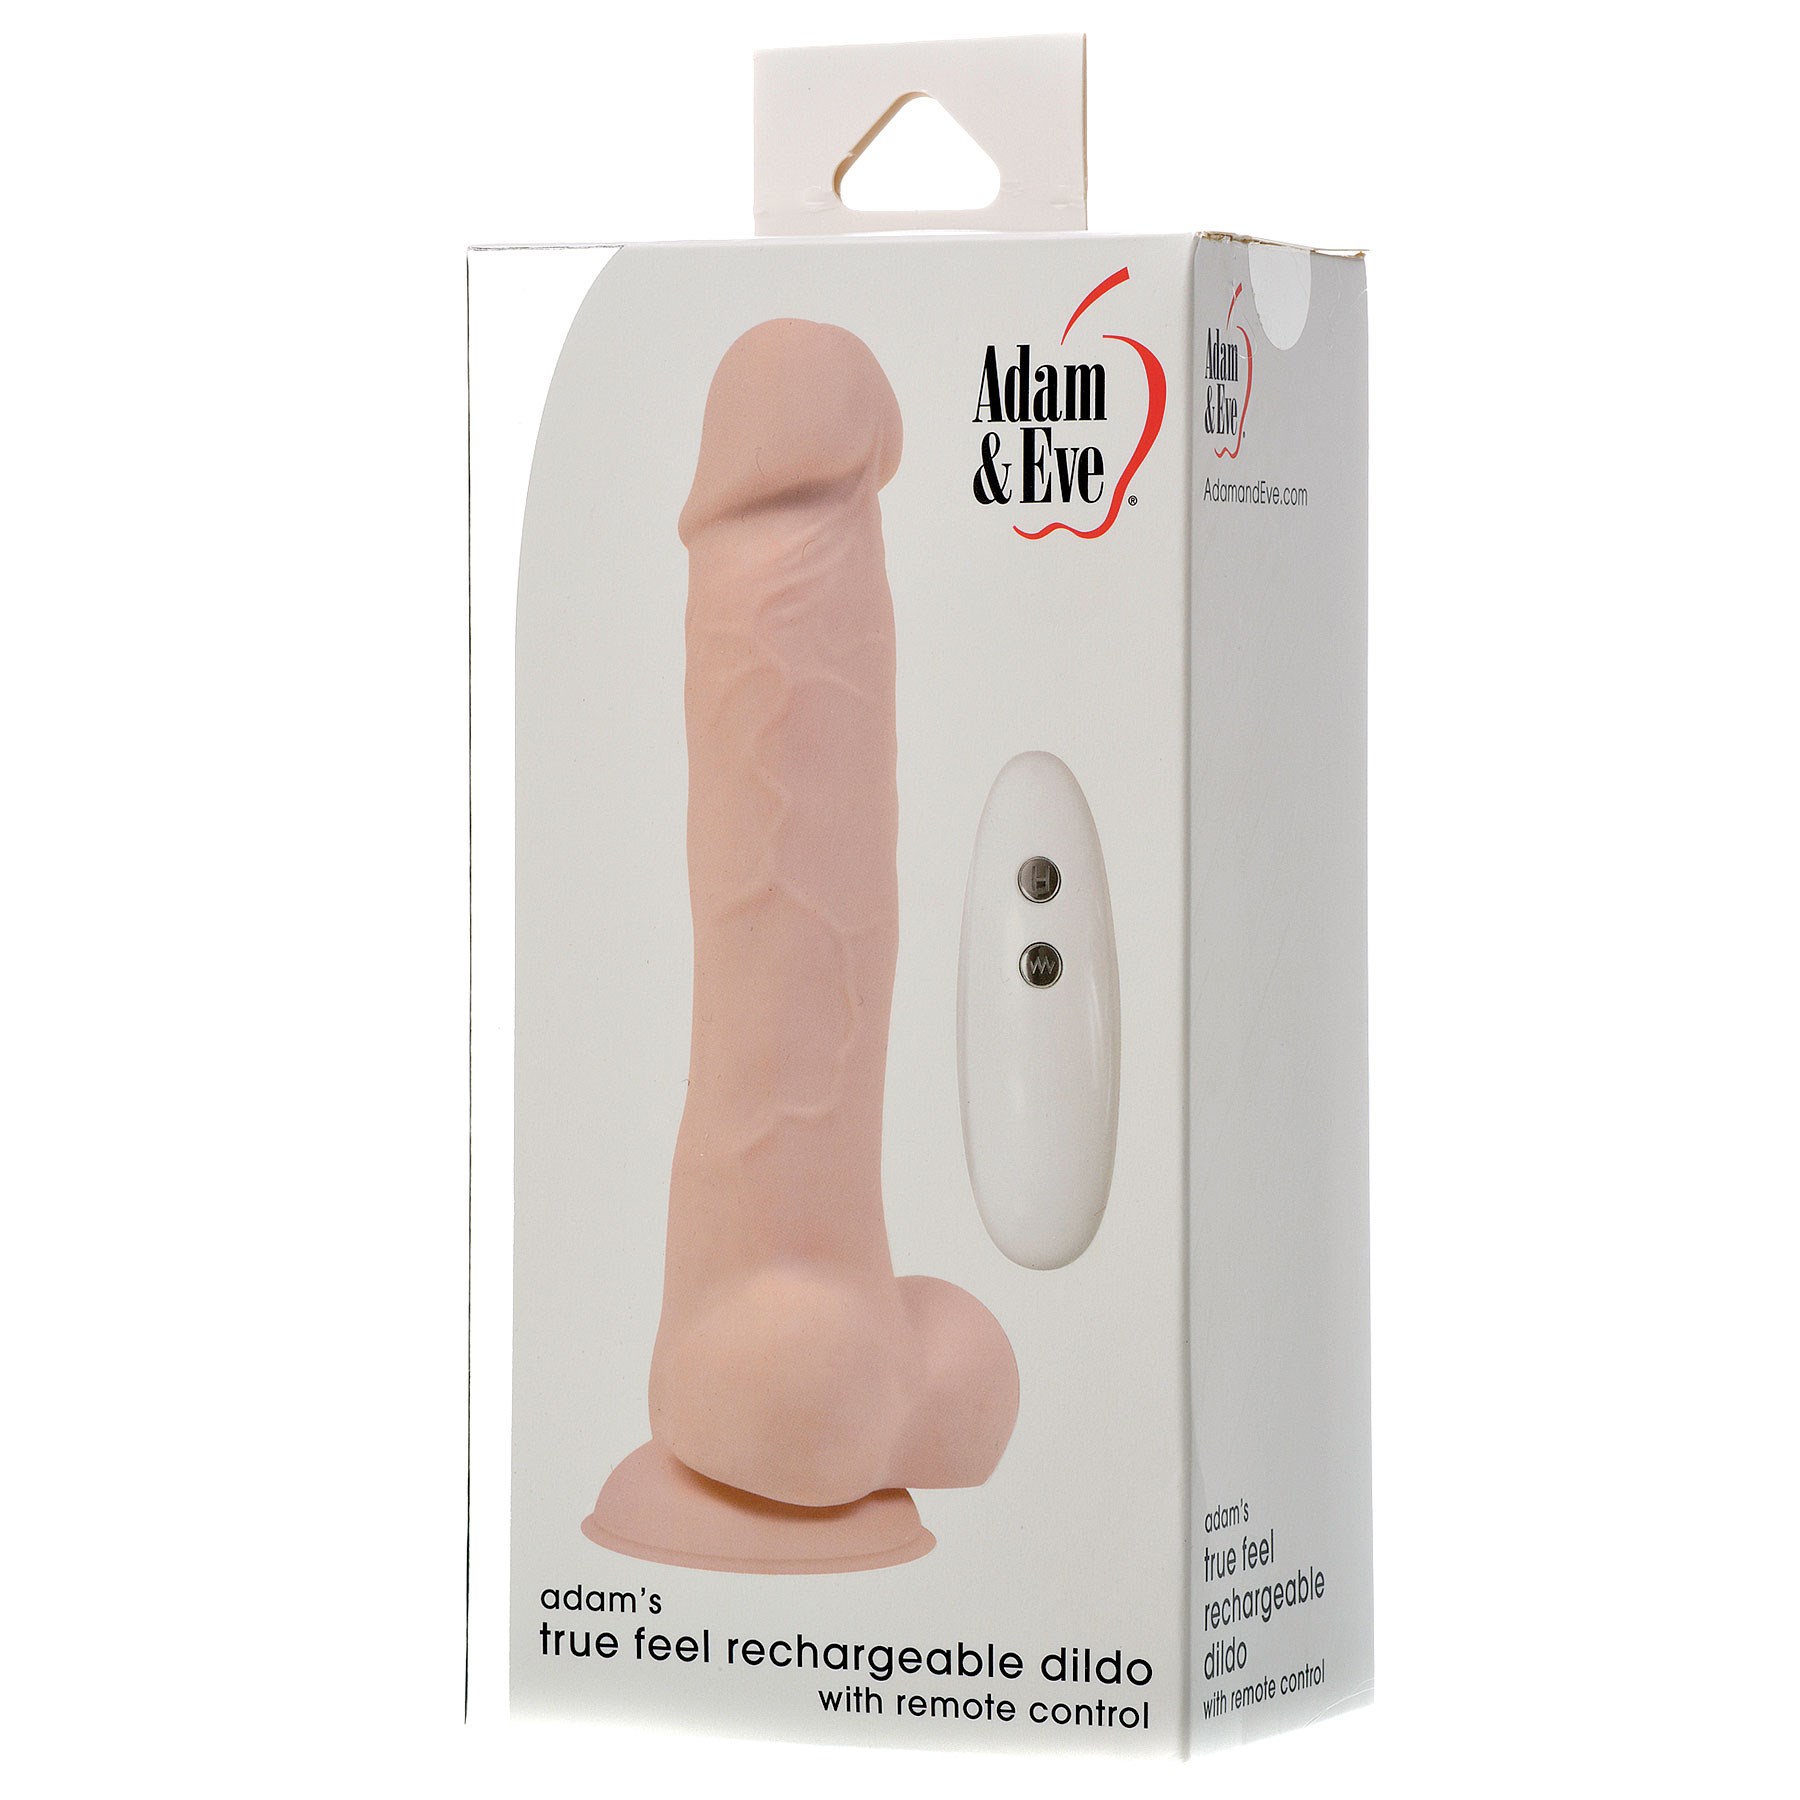 Adam's True Feel Rechargeable Dildo With Remote Control Package Shot